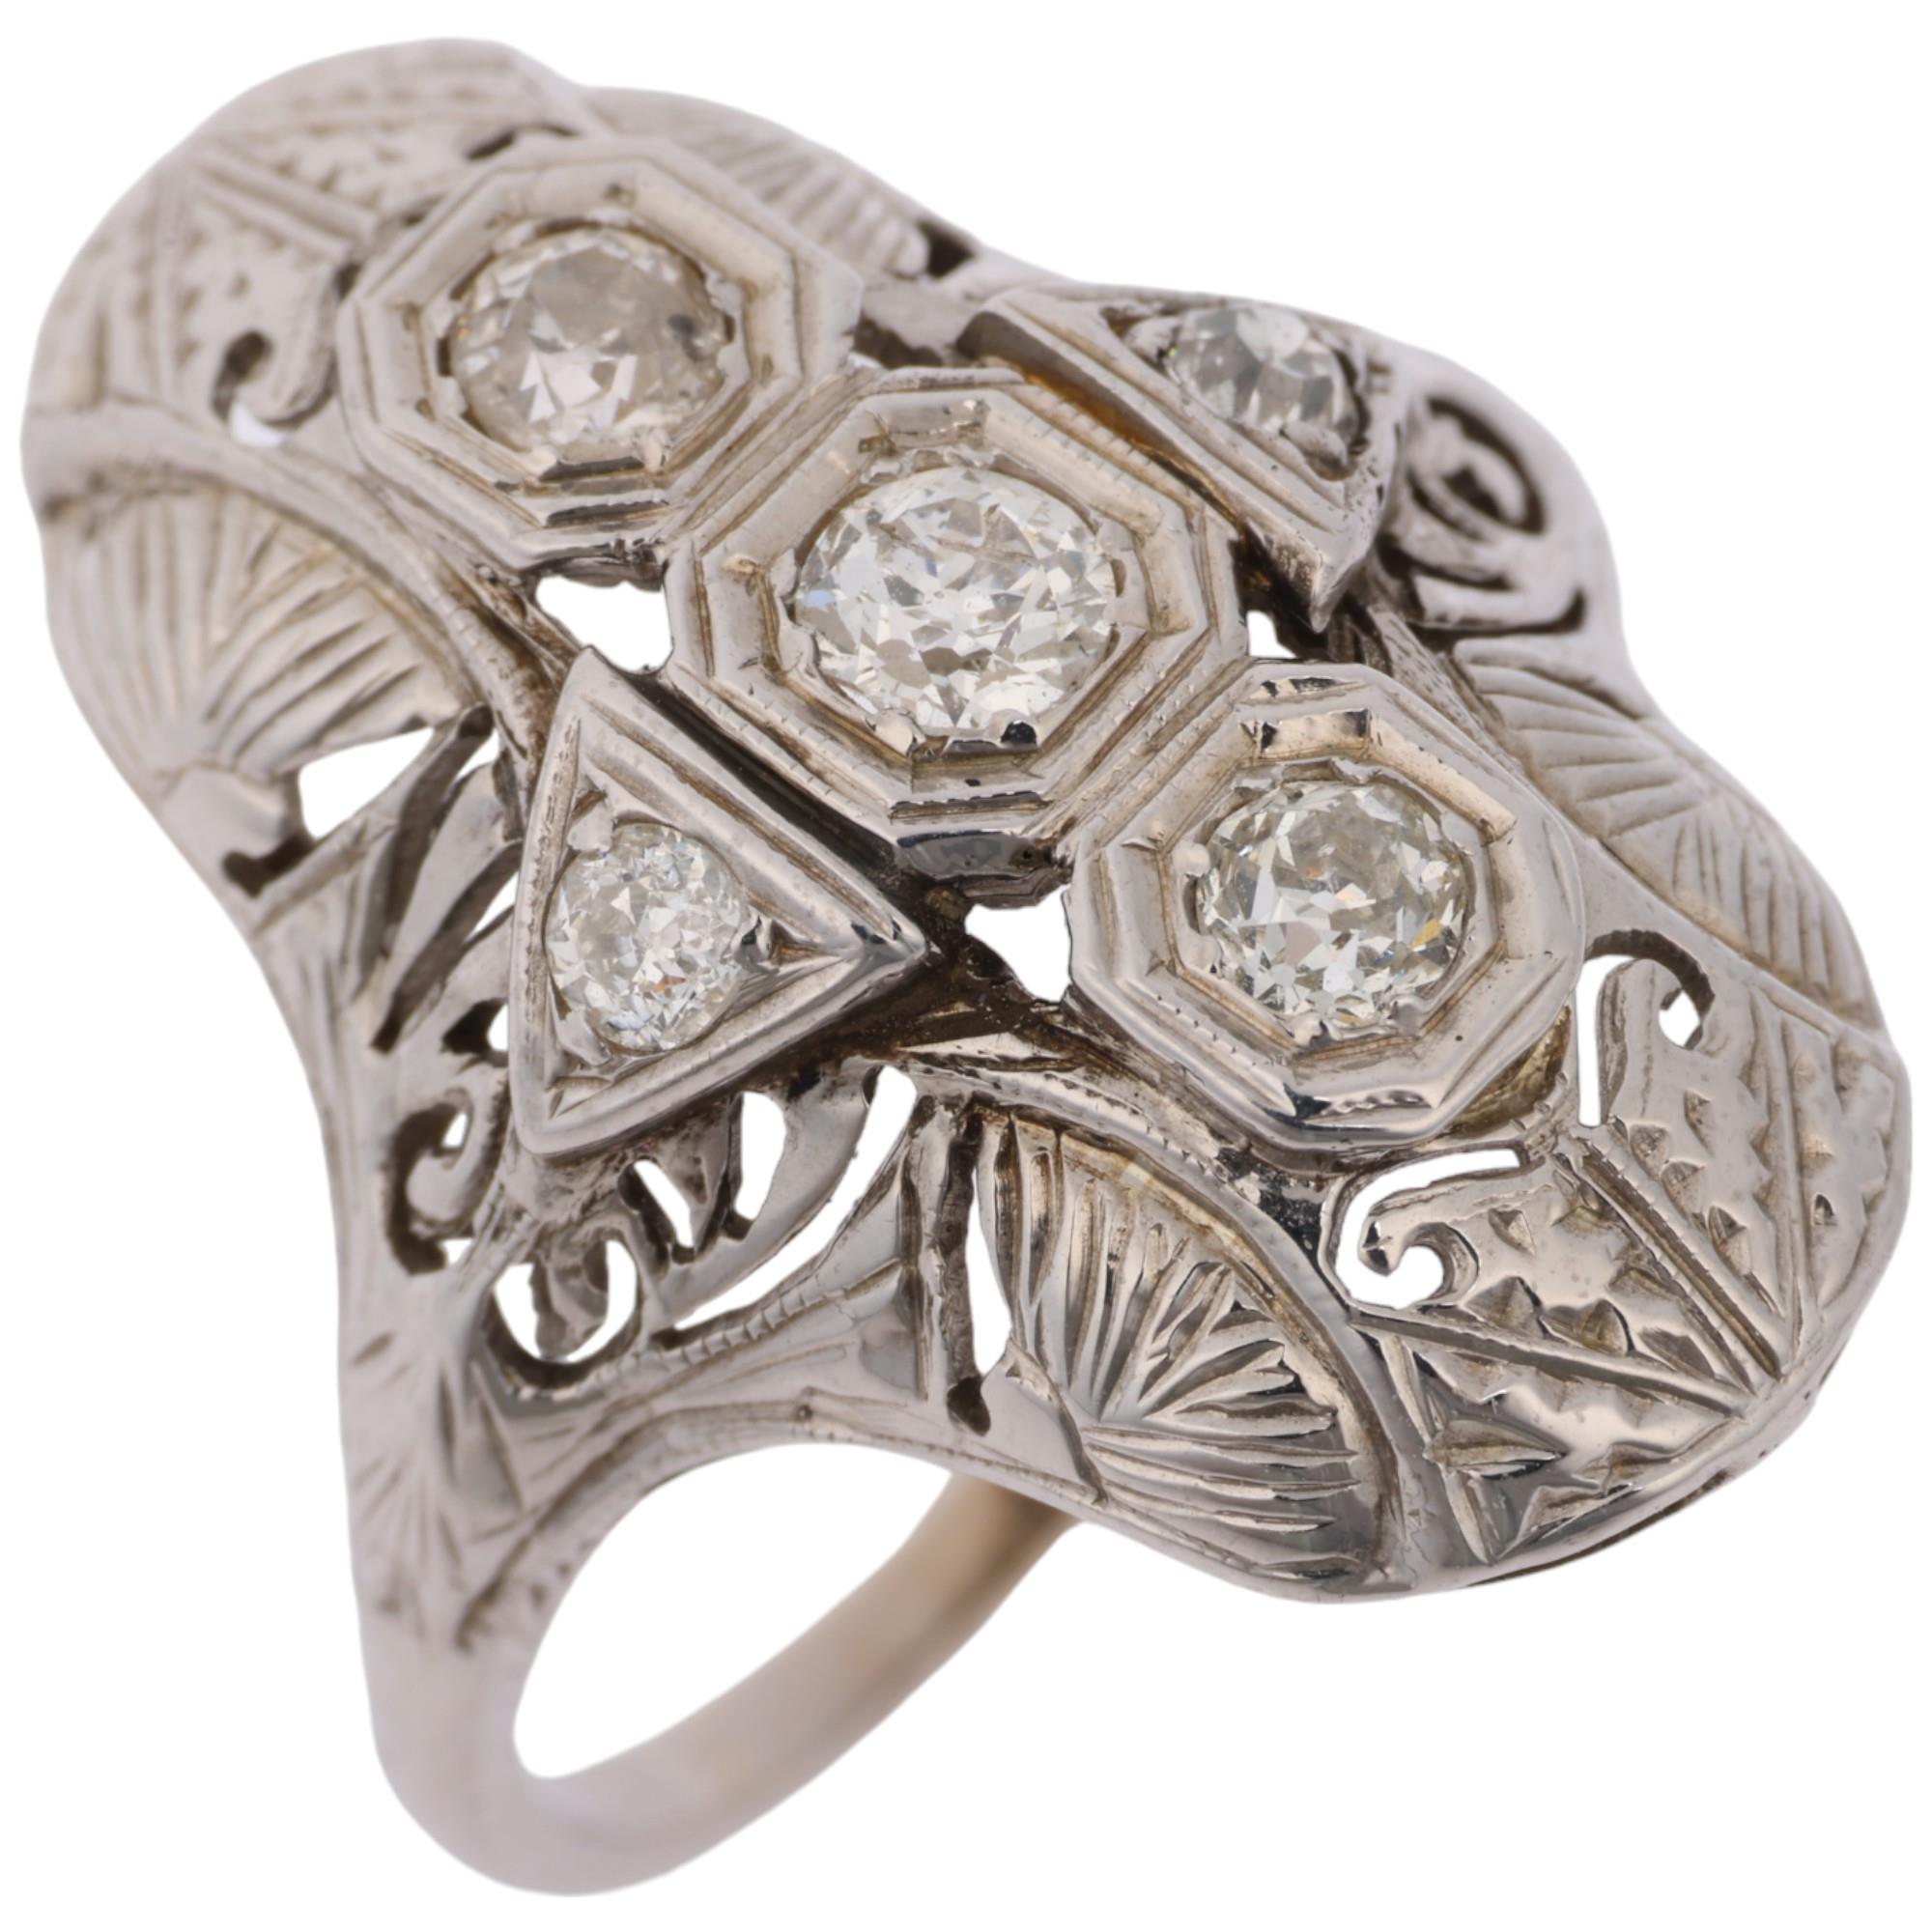 An Art Deco style 18ct white gold diamond panel cocktail ring, set with old European-cut diamonds - Image 2 of 4